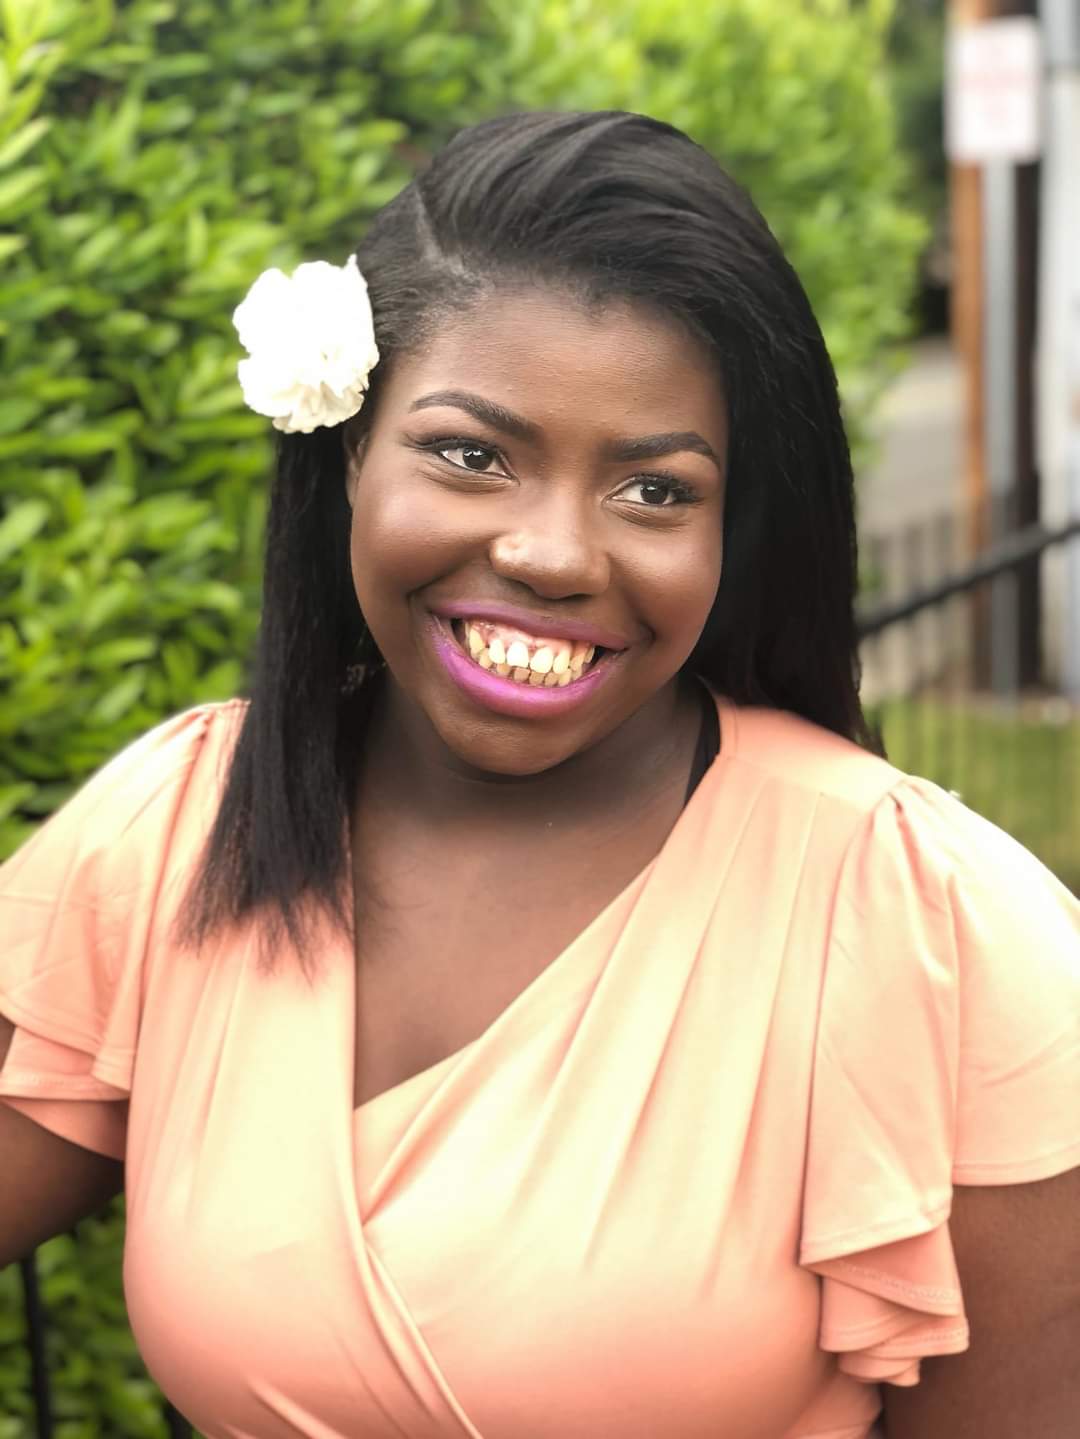 Miriam has black hair and dark skin and is wearing a white flower in her hair. She is smiling in front of greenery wearing a peach colored dress.